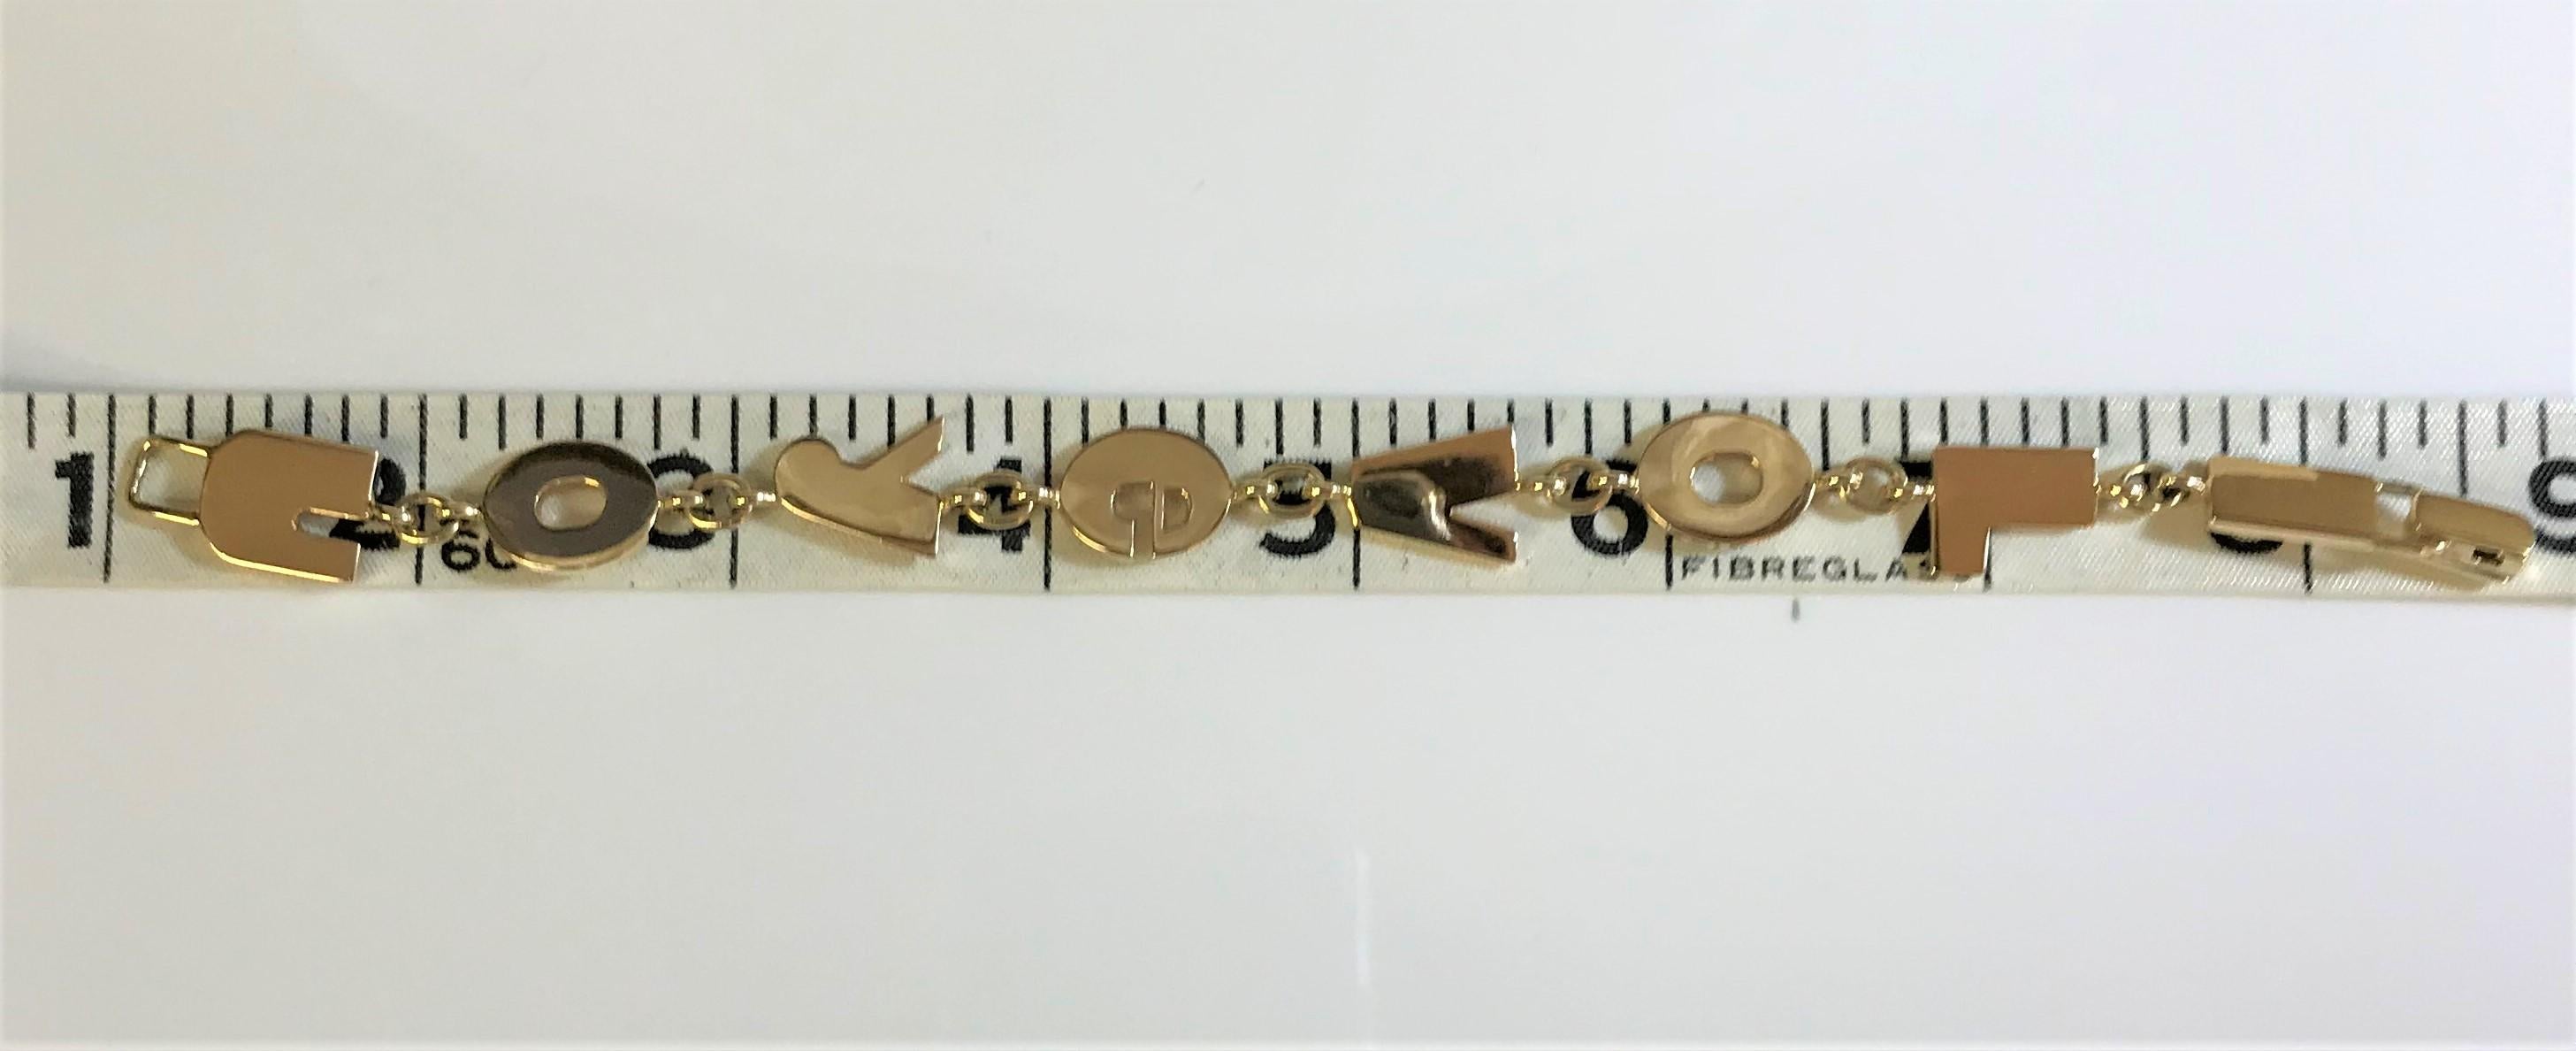 There is no better way to show your love than to have it written with your jewelry!
14 karat yellow gold bracelet spells out I LOVE YOU
Letters connected by links
Fold-over catch clasp
This piece is new and has never been worn
Approximately 7.5